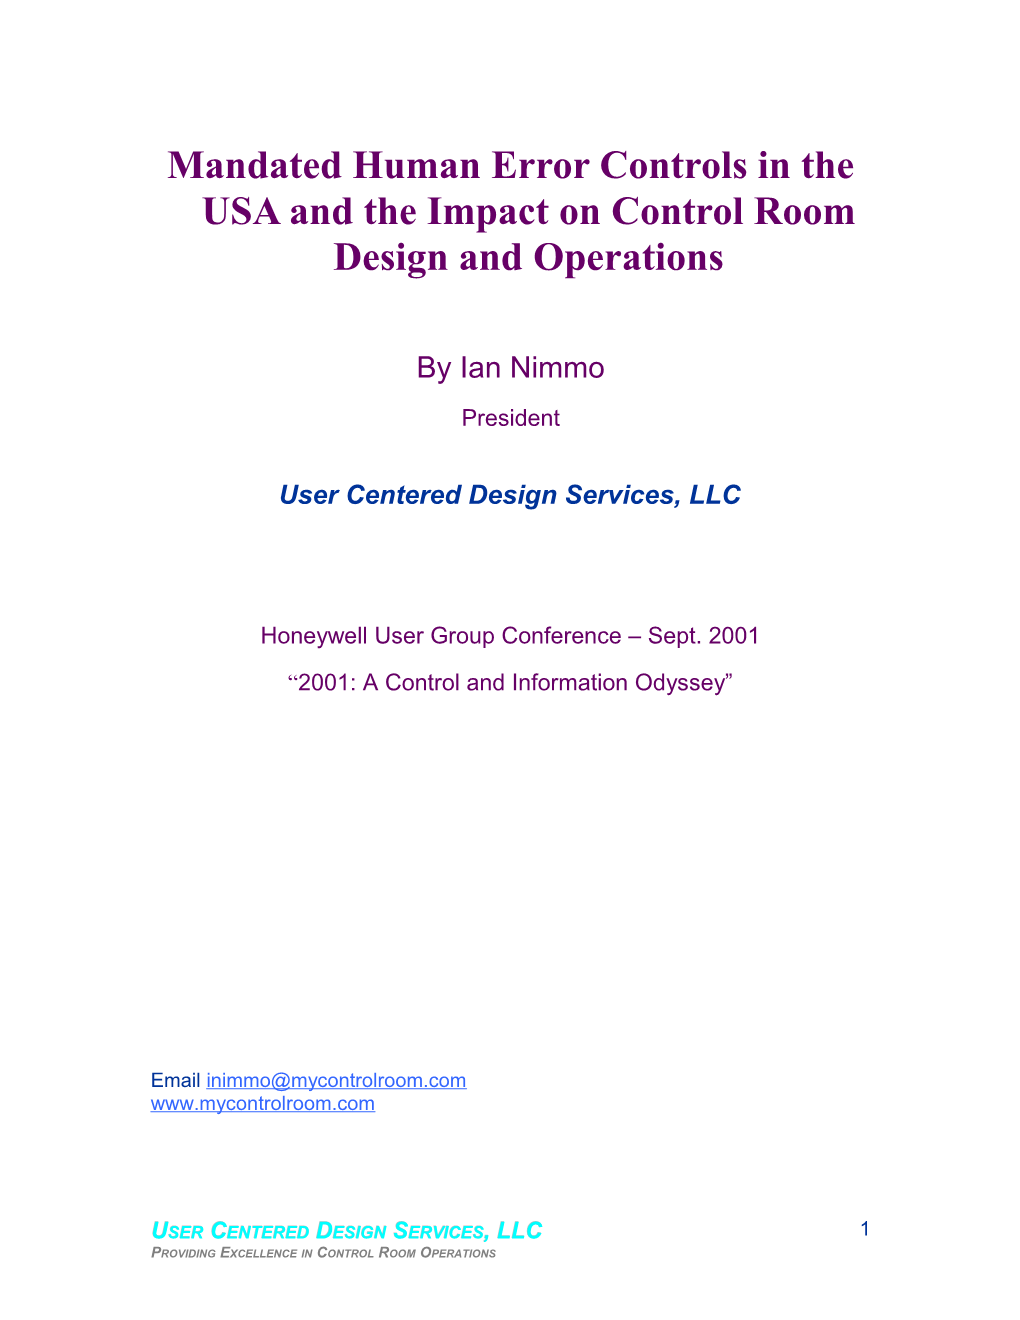 Mandated Human Error Controls in the USA and the Impact on Control Room Design and Operations